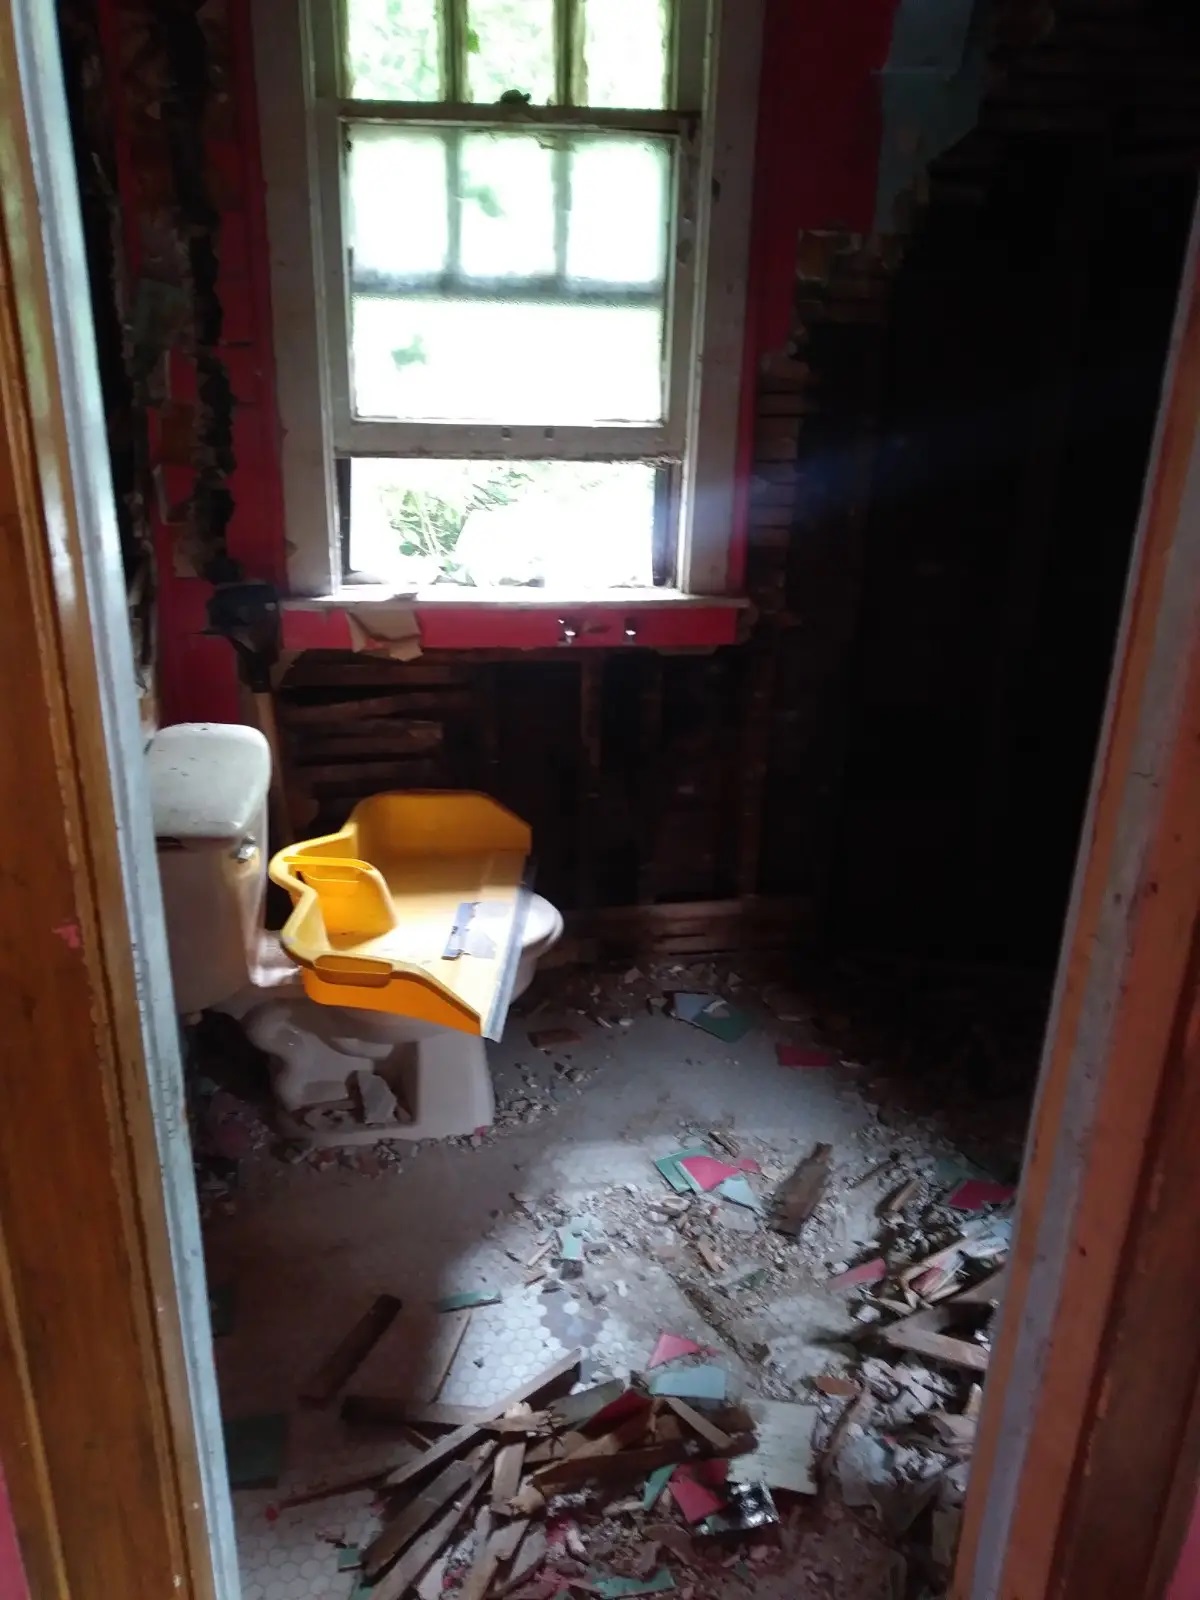 The house was in unlivable condition when she bought it, Averhart said.